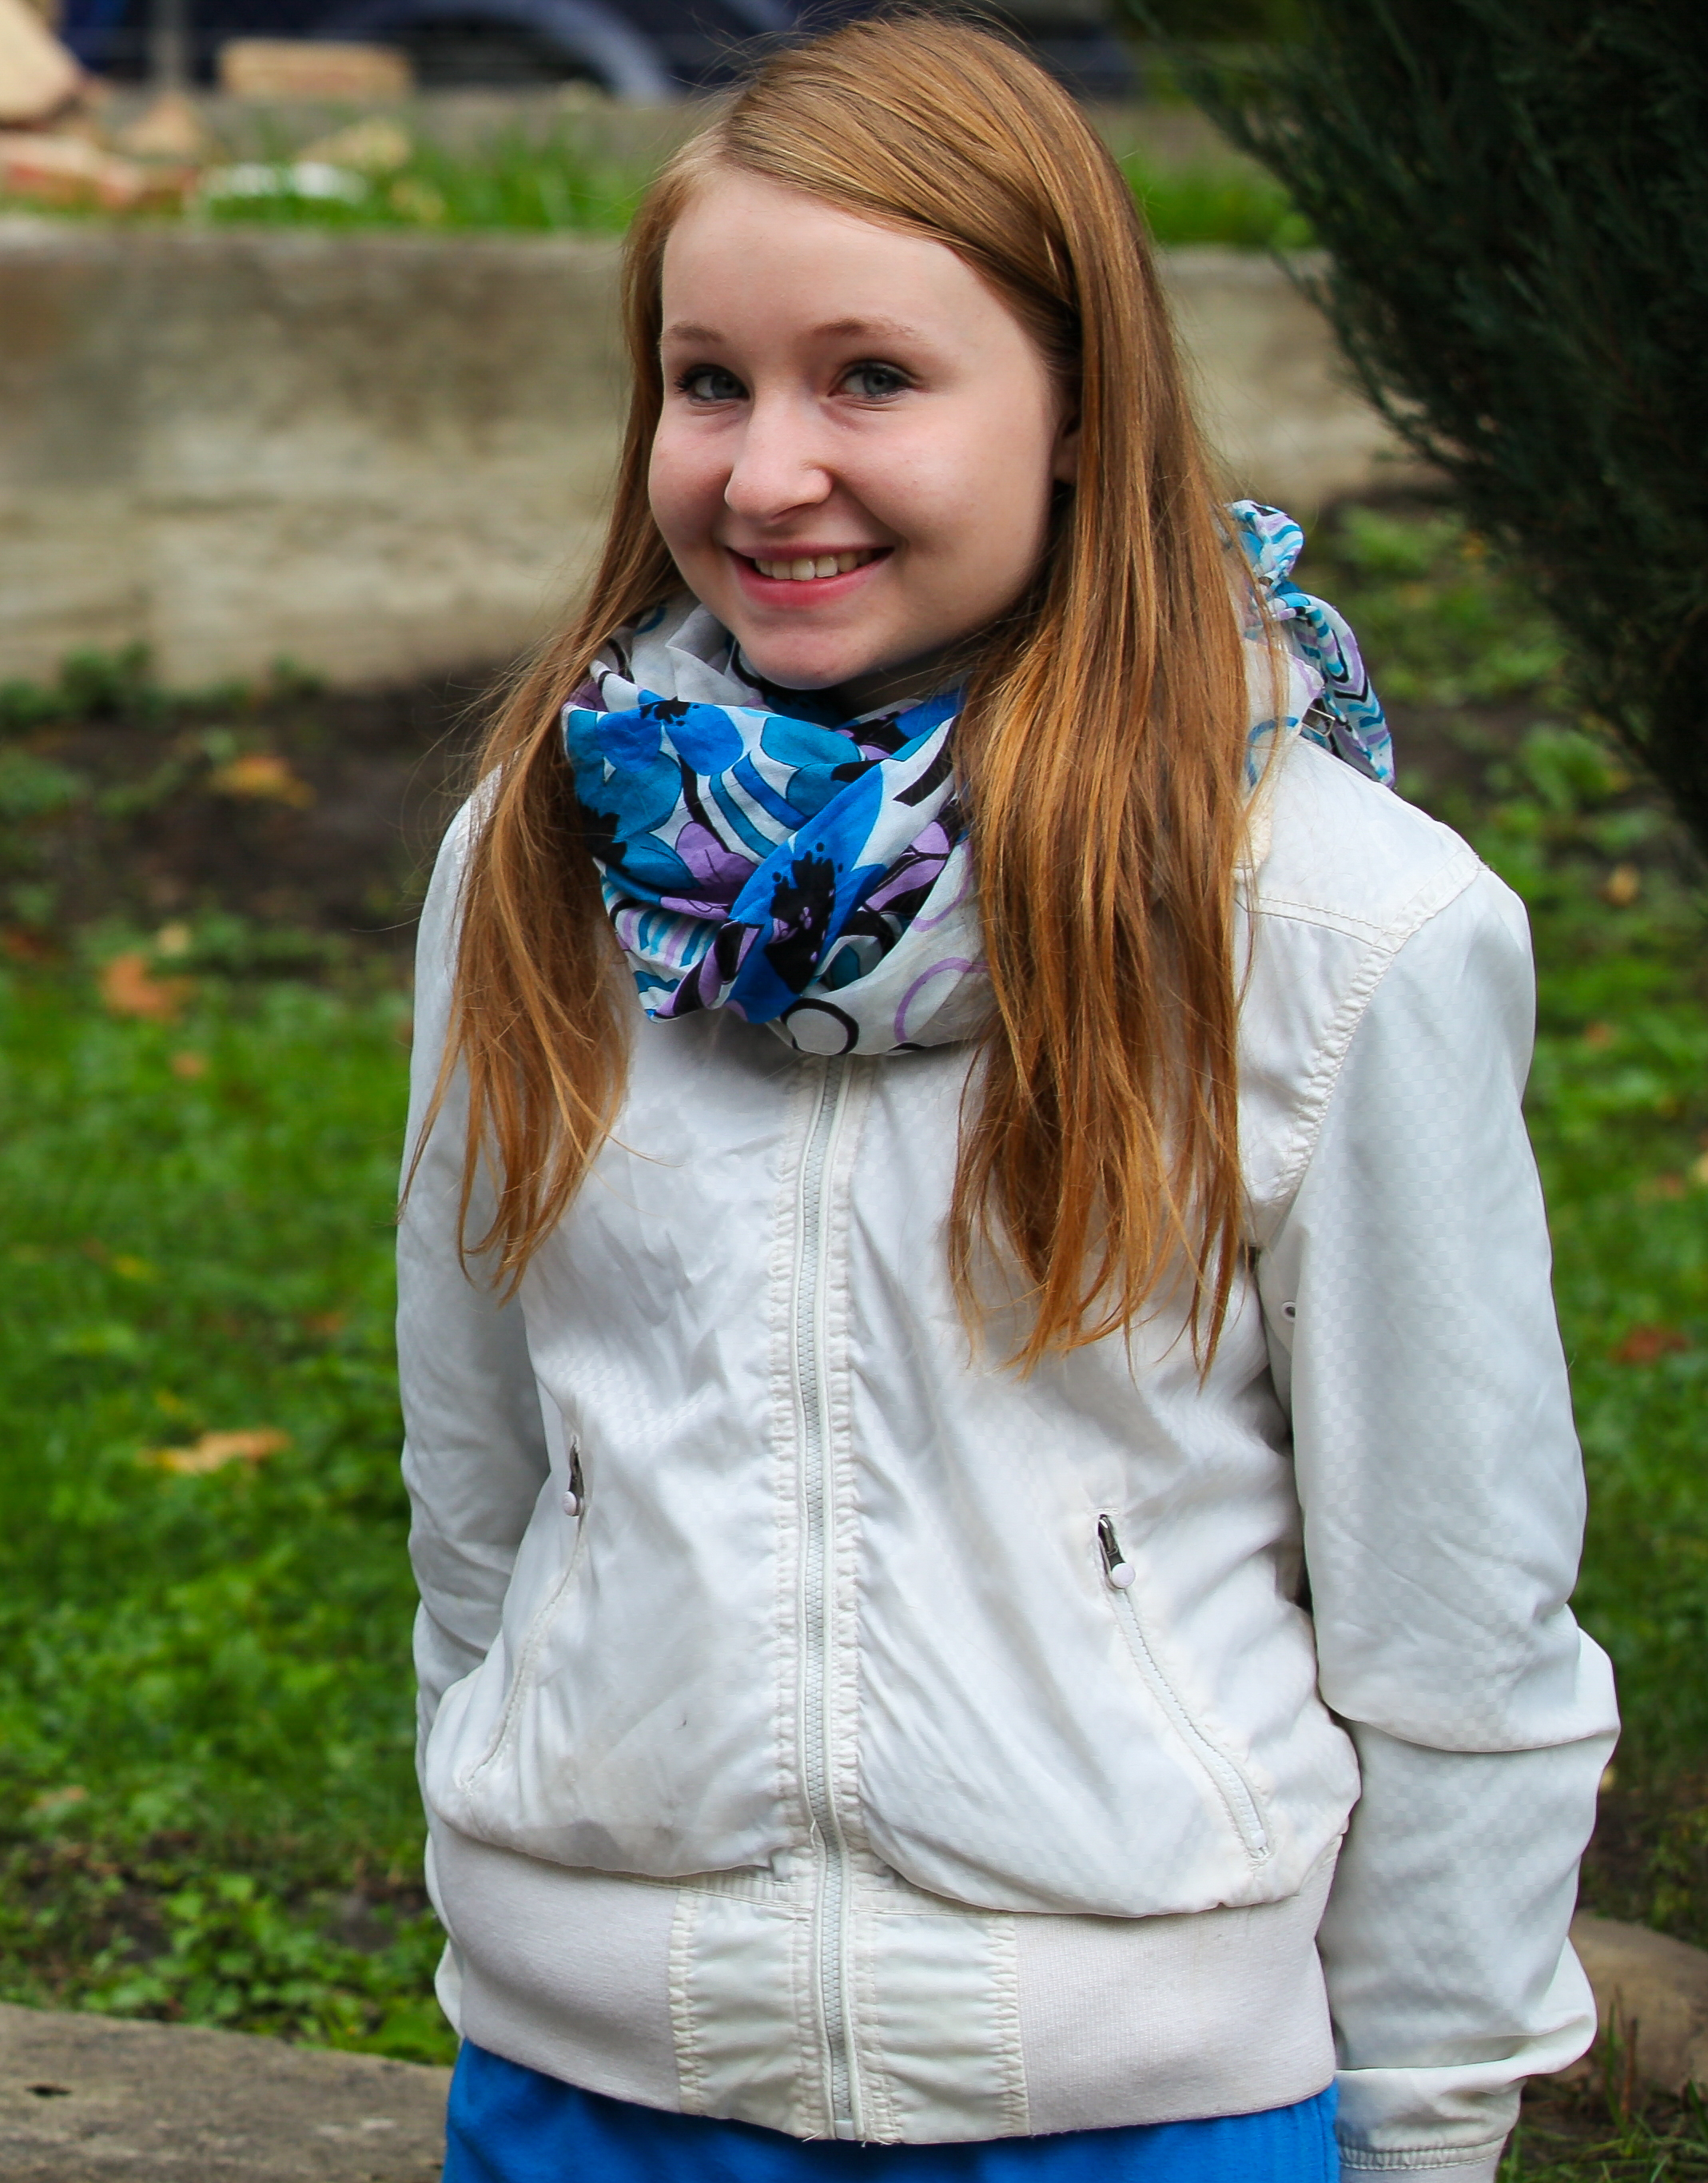 a smiling cute blond girl near a Catholic church photographed in September 2013, picture 1/6